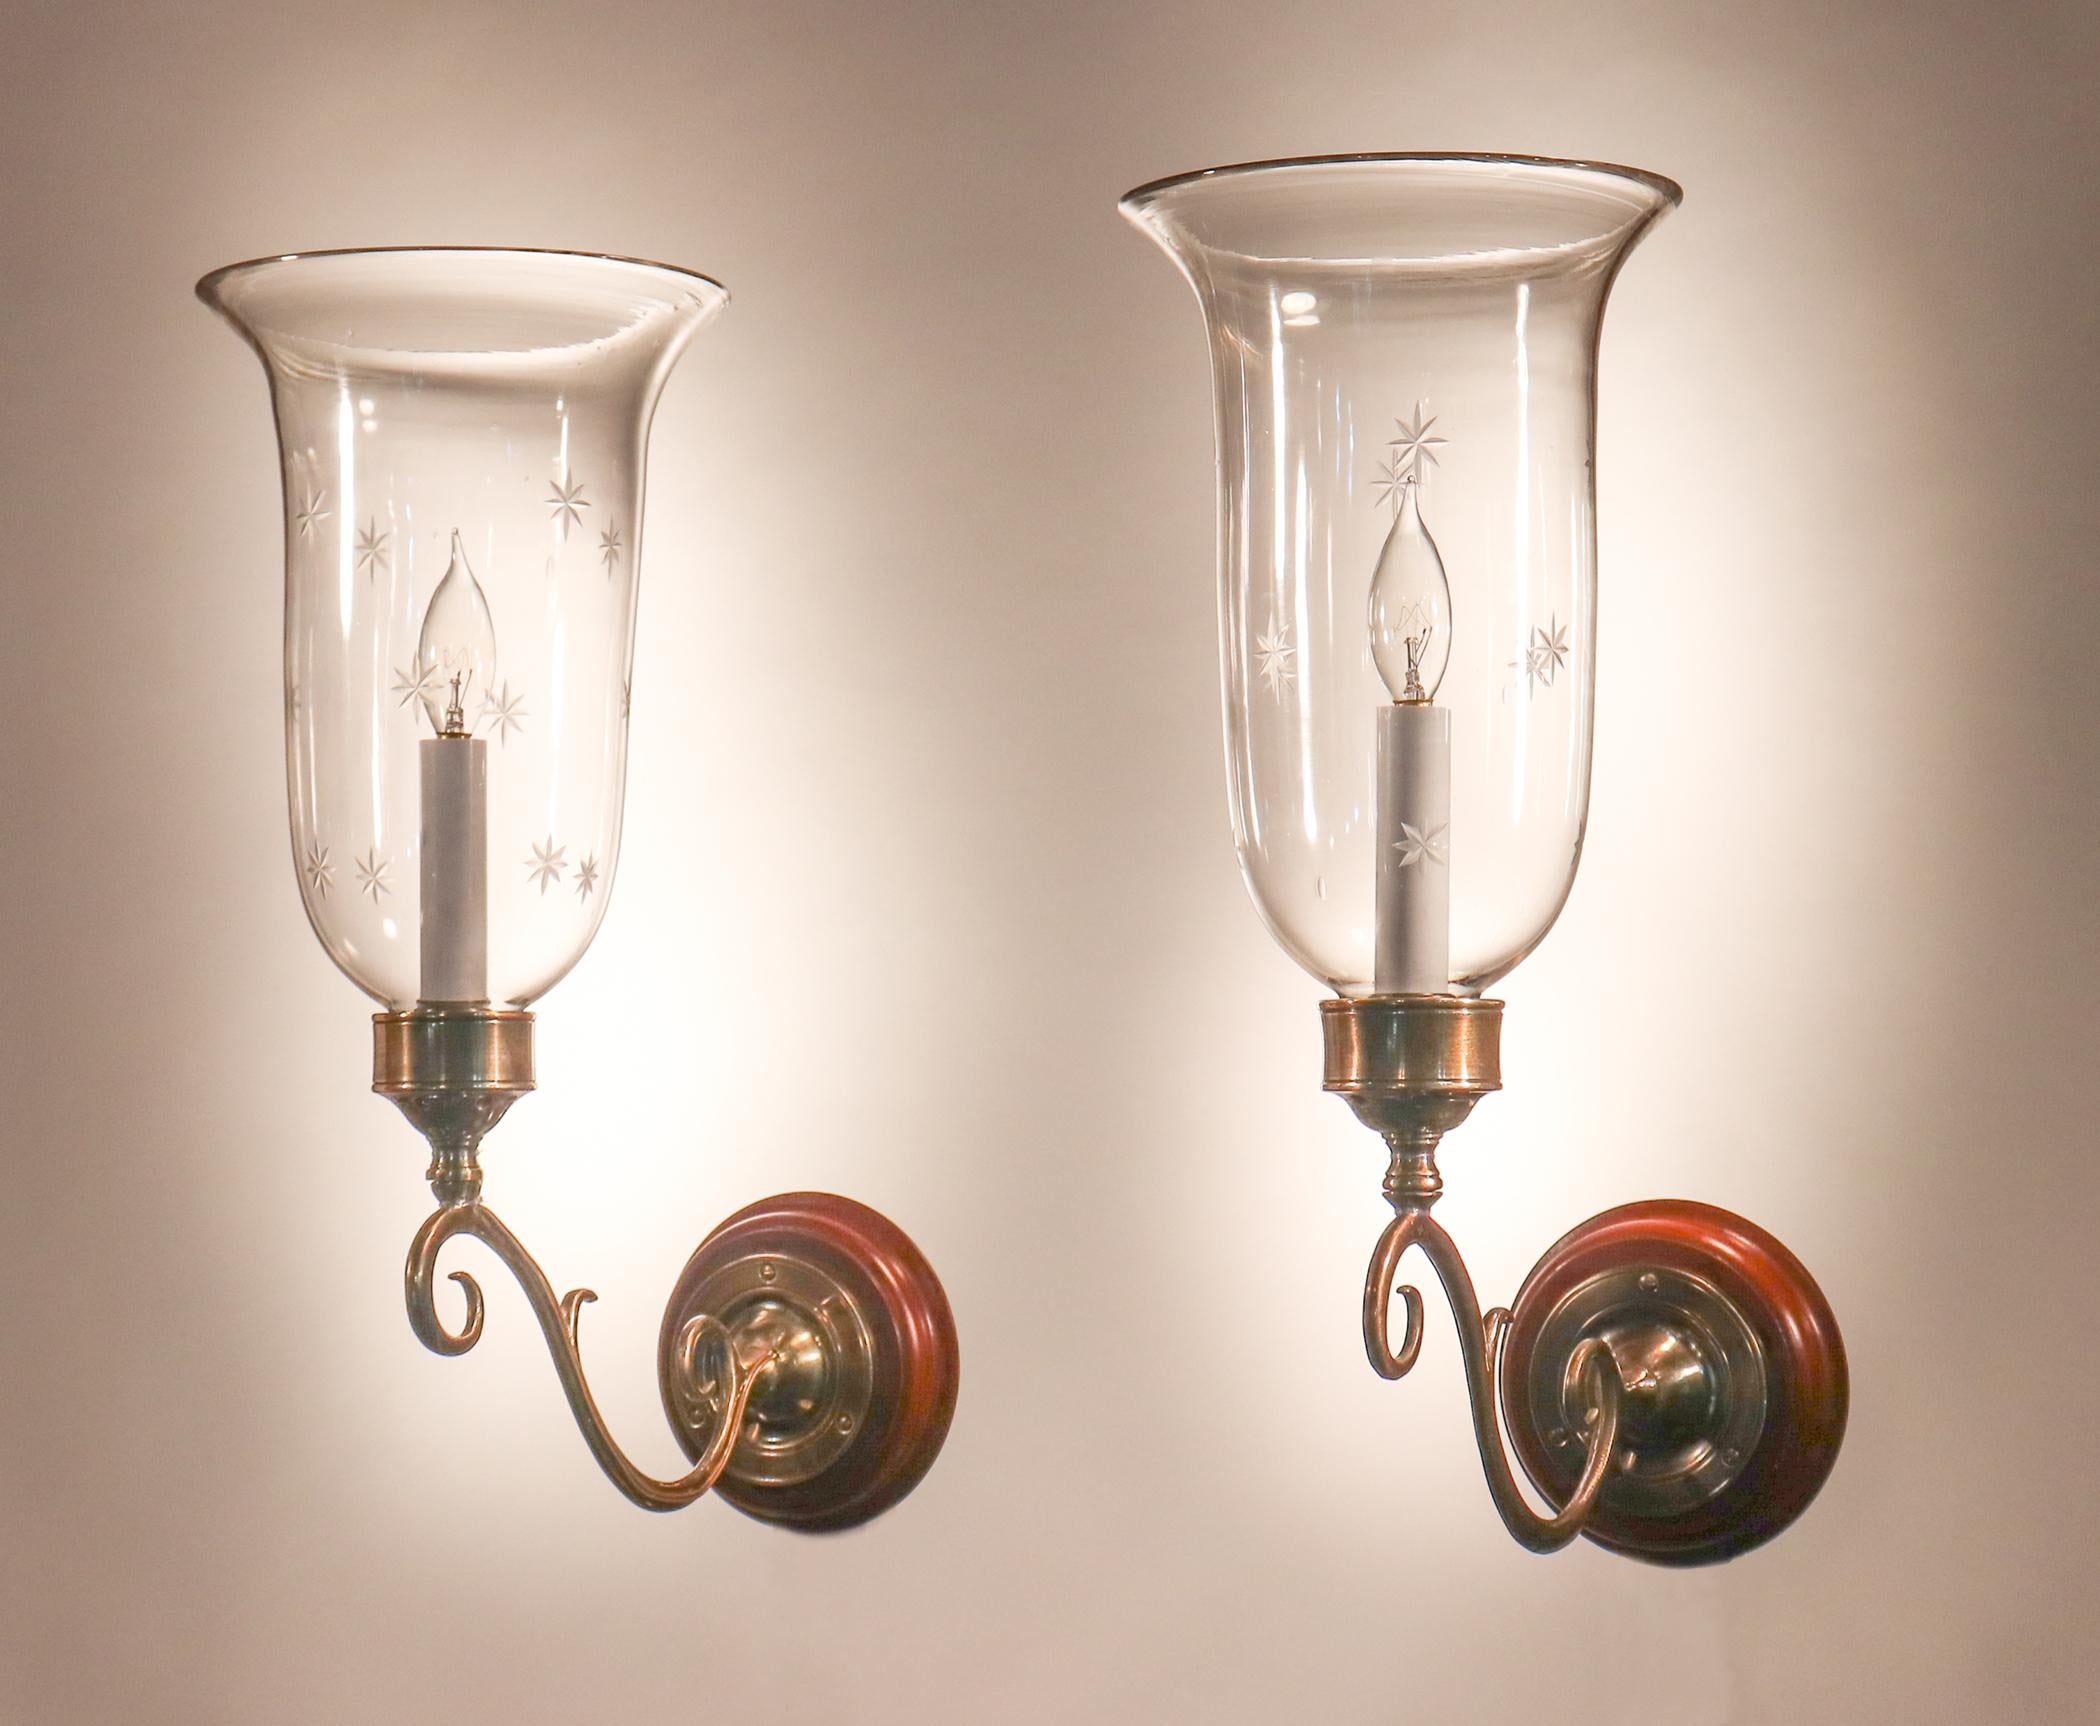 A lovely pair of flared hurricane shade wall sconces from England, circa 1900. These graceful shades have a finely etched star motif, as well as desirable air bubbles in the hand blown glass that speak to the quality and age of the shades. The